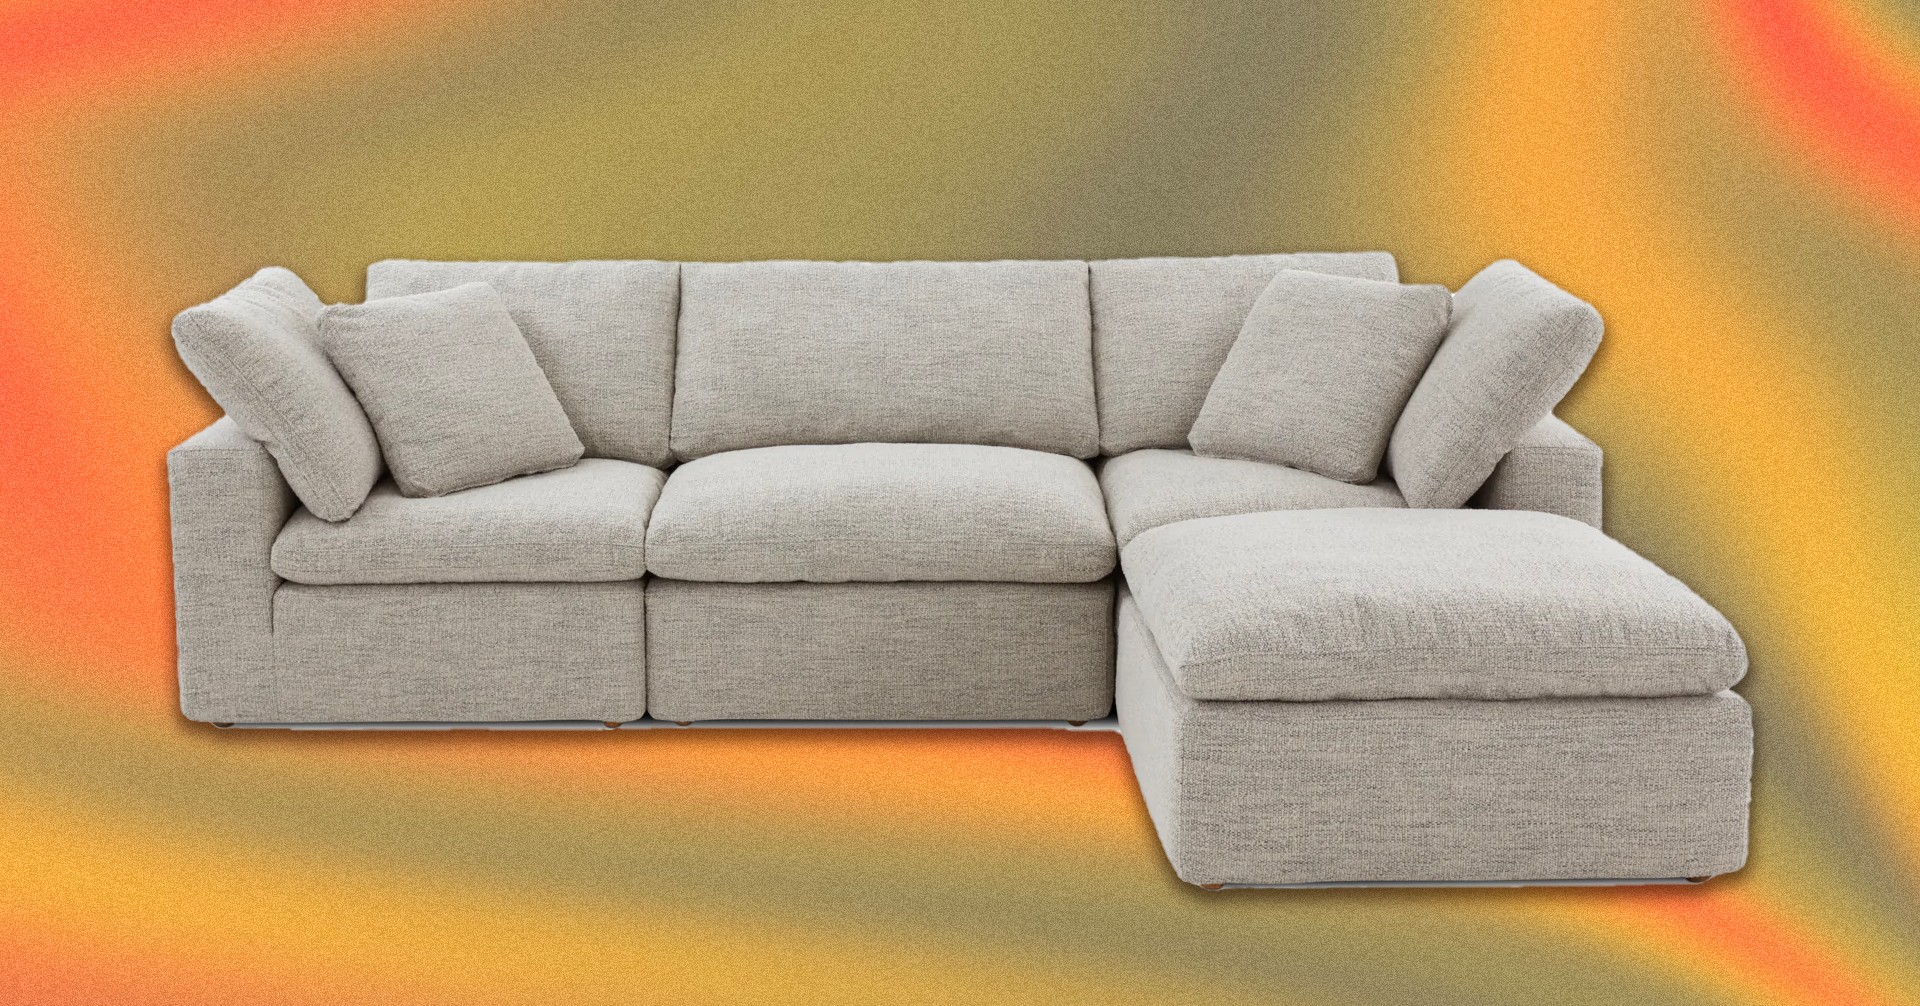 Review Of Albany Park S Kova Sectional Sofa